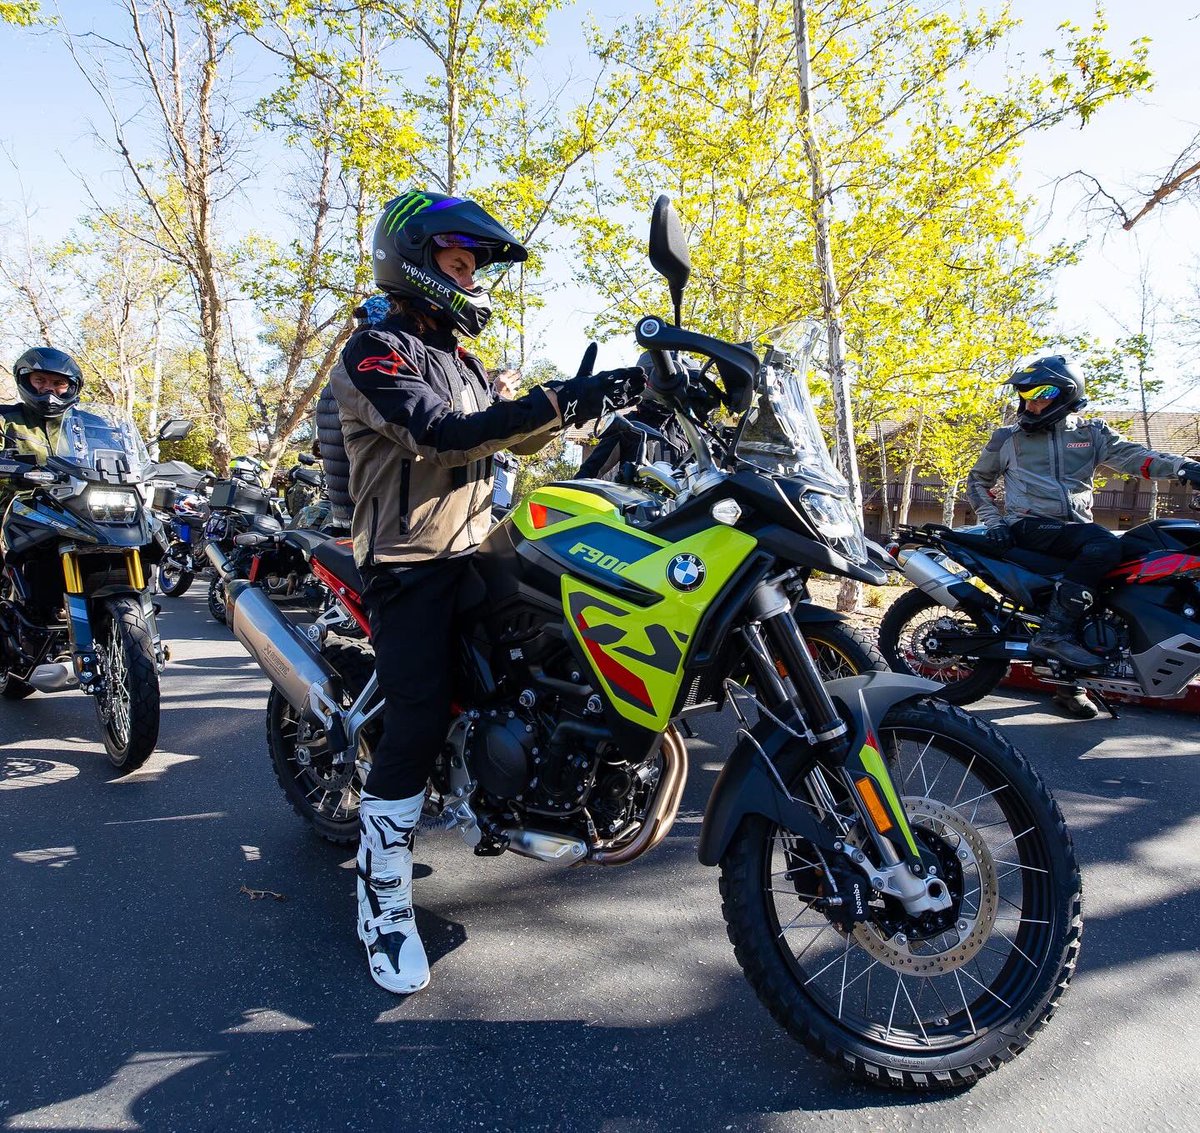 #TBT Throwback to our XD-5 US Press Launch a couple of weeks ago in Temecula, CA. It was great to have the top journalists from the US experience the all-new XD-5. AraiAmericas.com #Arai #AraiHelmet #PriorityforProtection #XD5 #ADV #Motorcycle #ThrowbackThursday